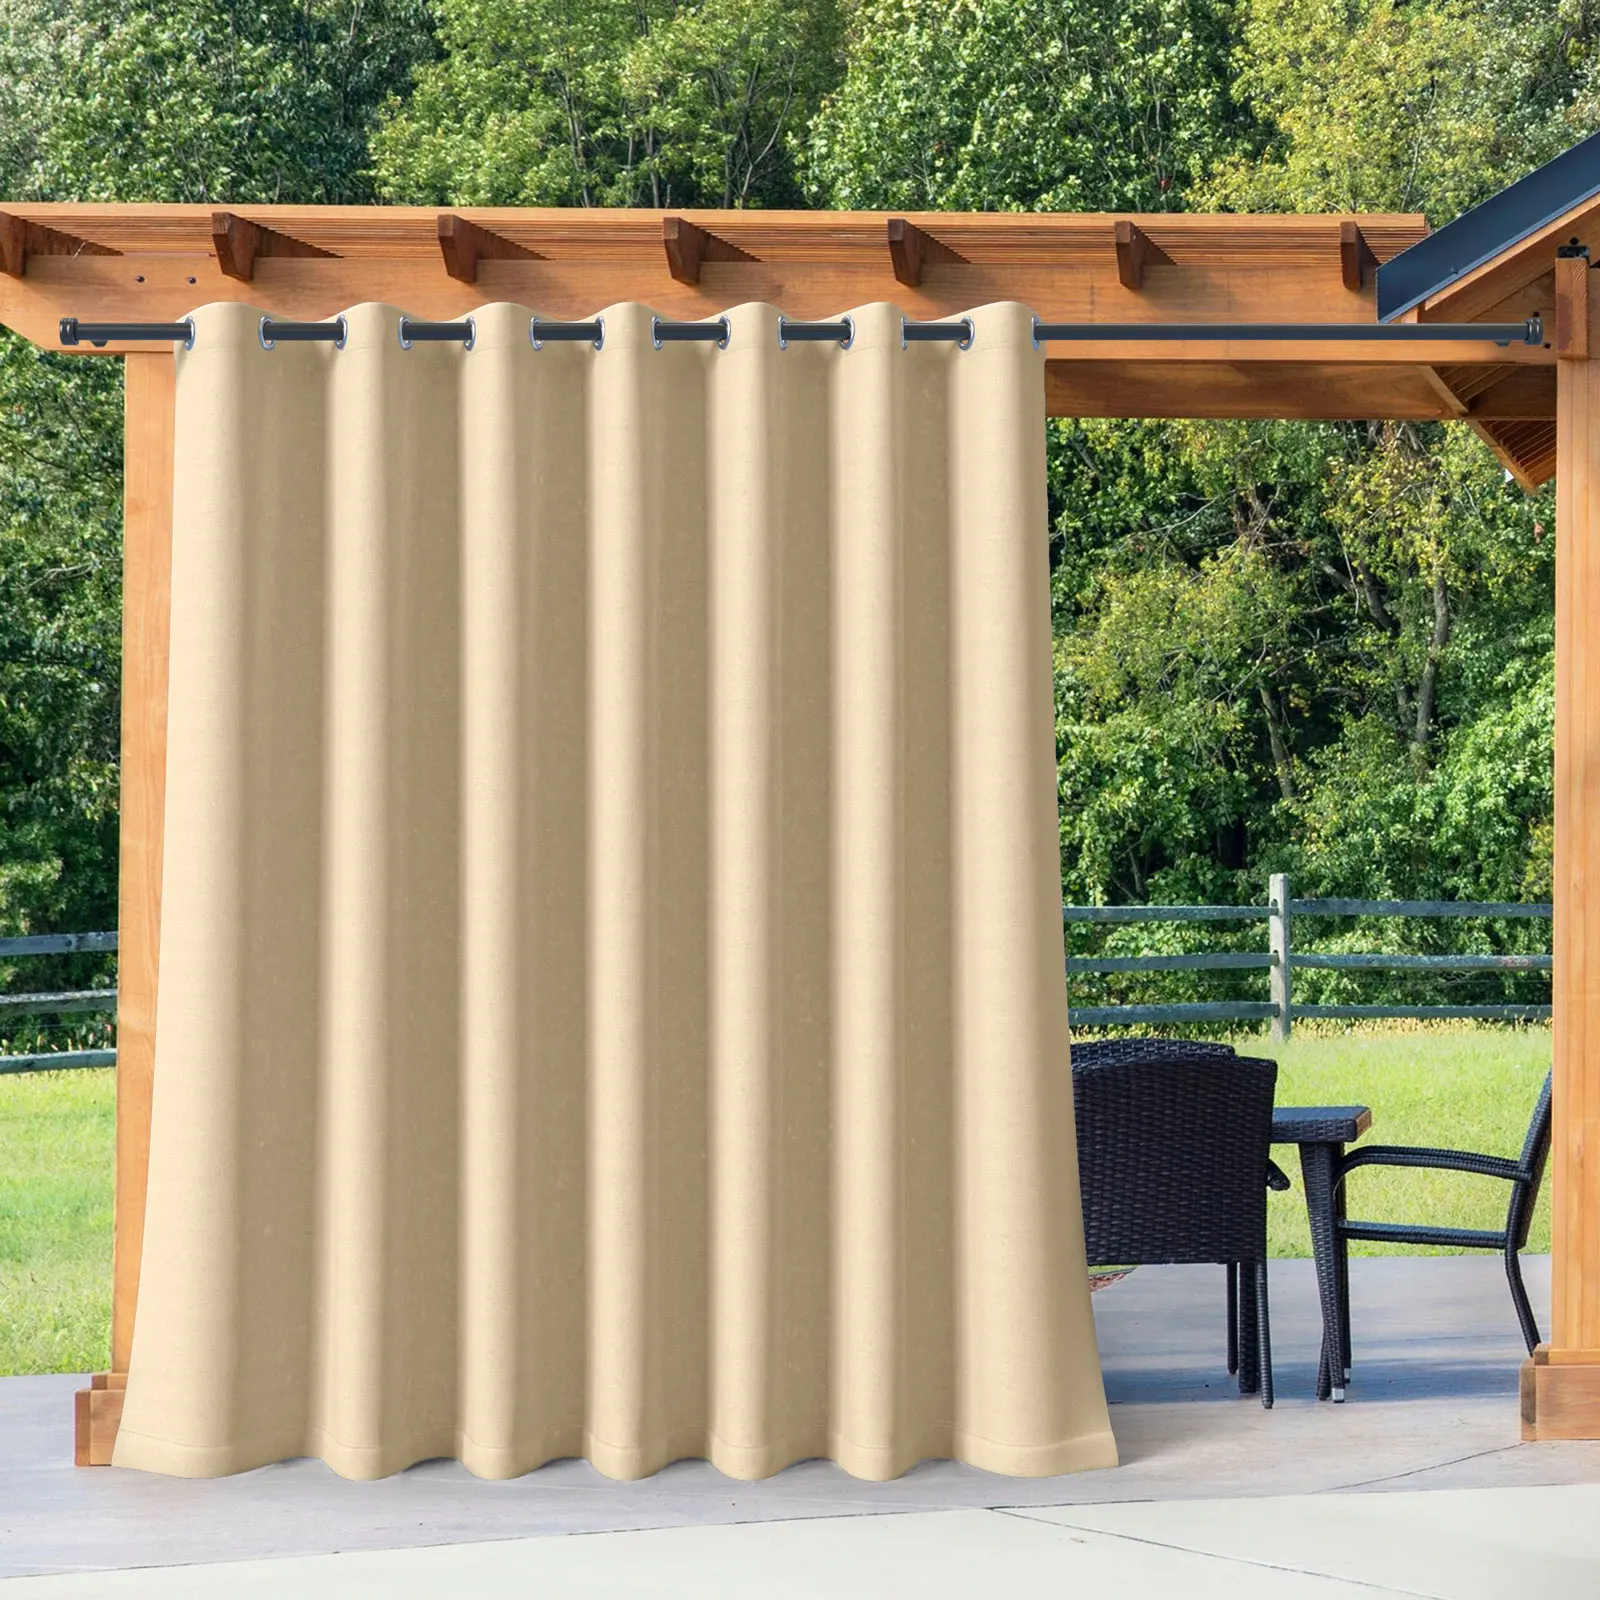 

Waterproof Outdoor Curtain Panels Blackout Patio Curtains for for Sliding Door / Foyer / Arbor / Lanai Custom Beige, 1 Panel